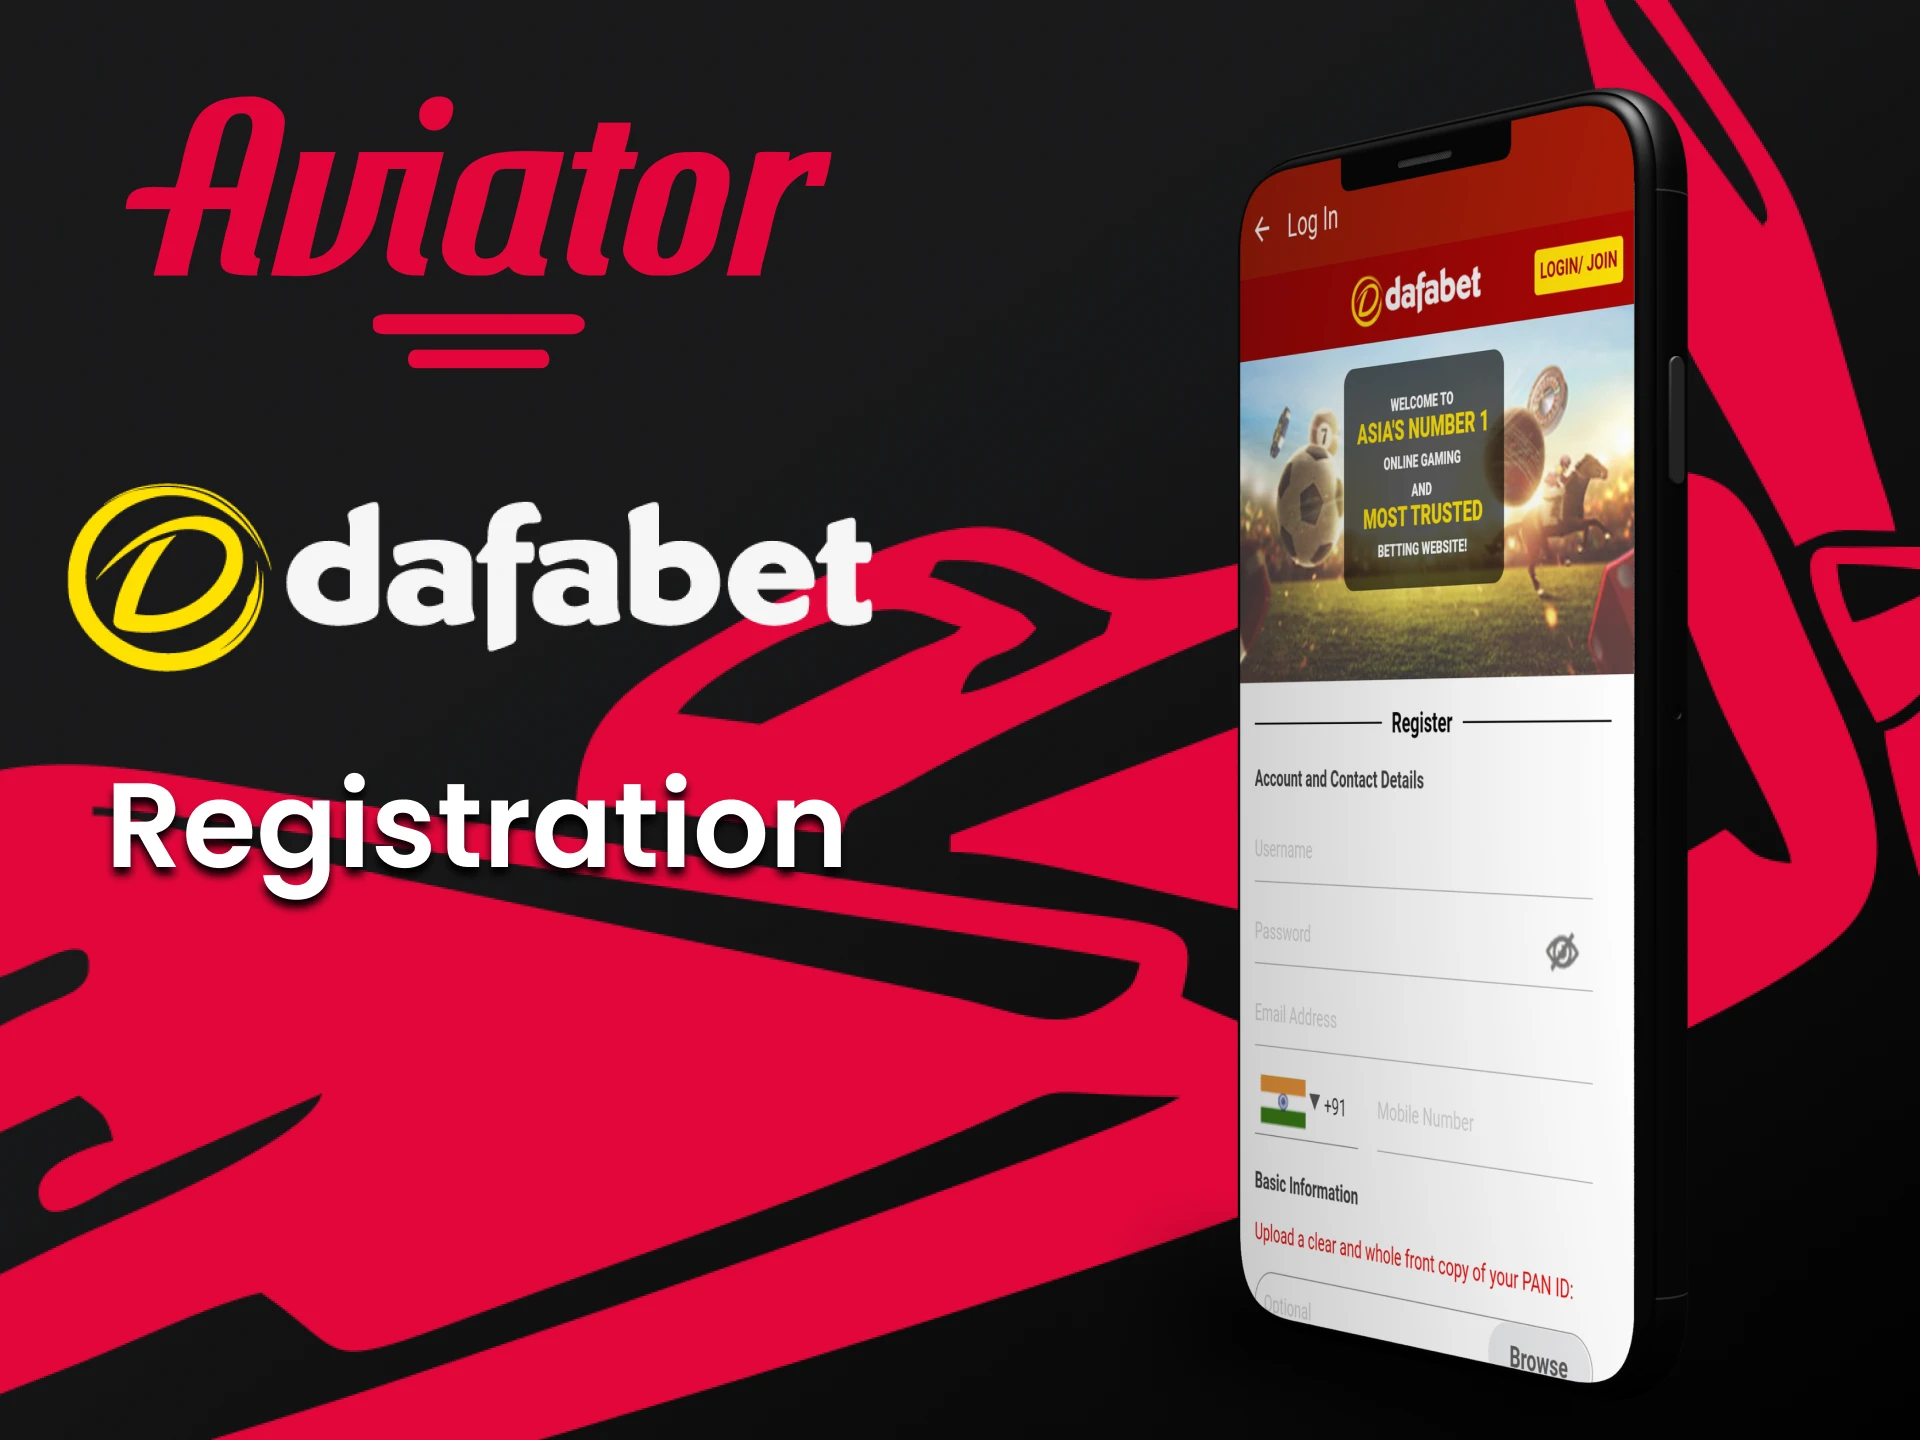 To play Aviator on Dafabet, you need to create an account.